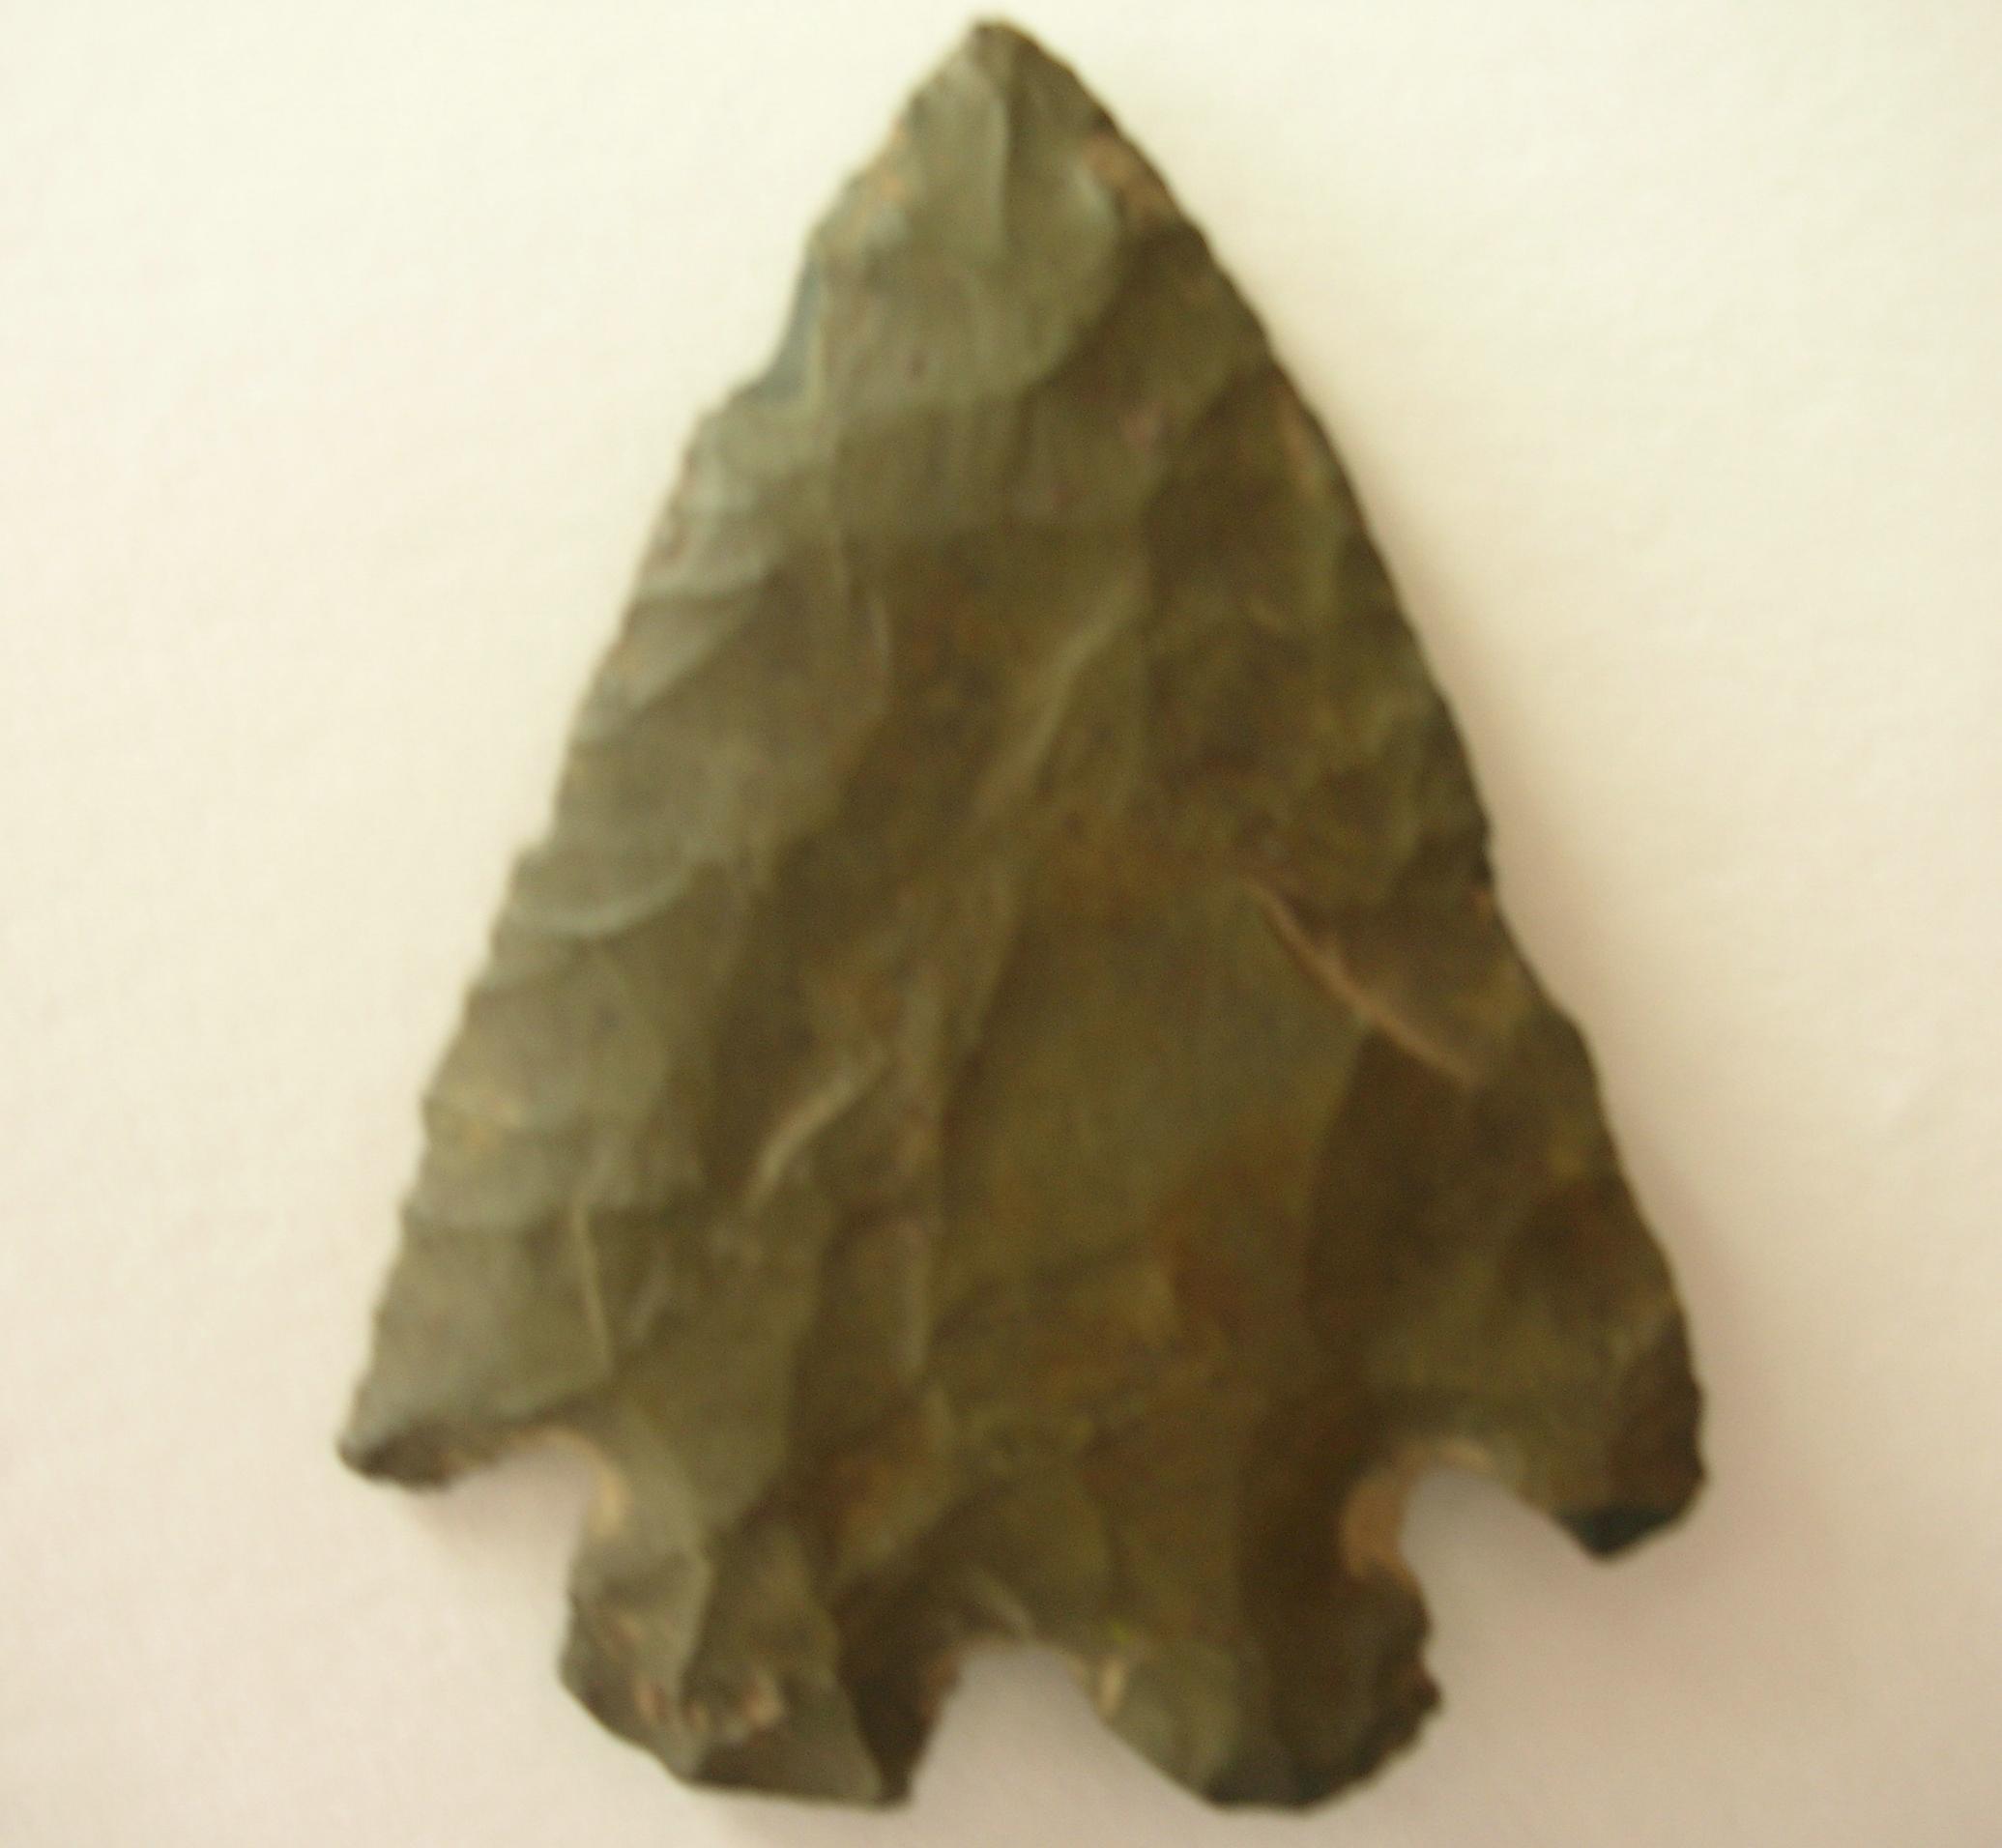 Projectile Point found near Wappingers Falls, NY, 1963 Lecroy Point, 9000-7000 Bp Early Archaic Period